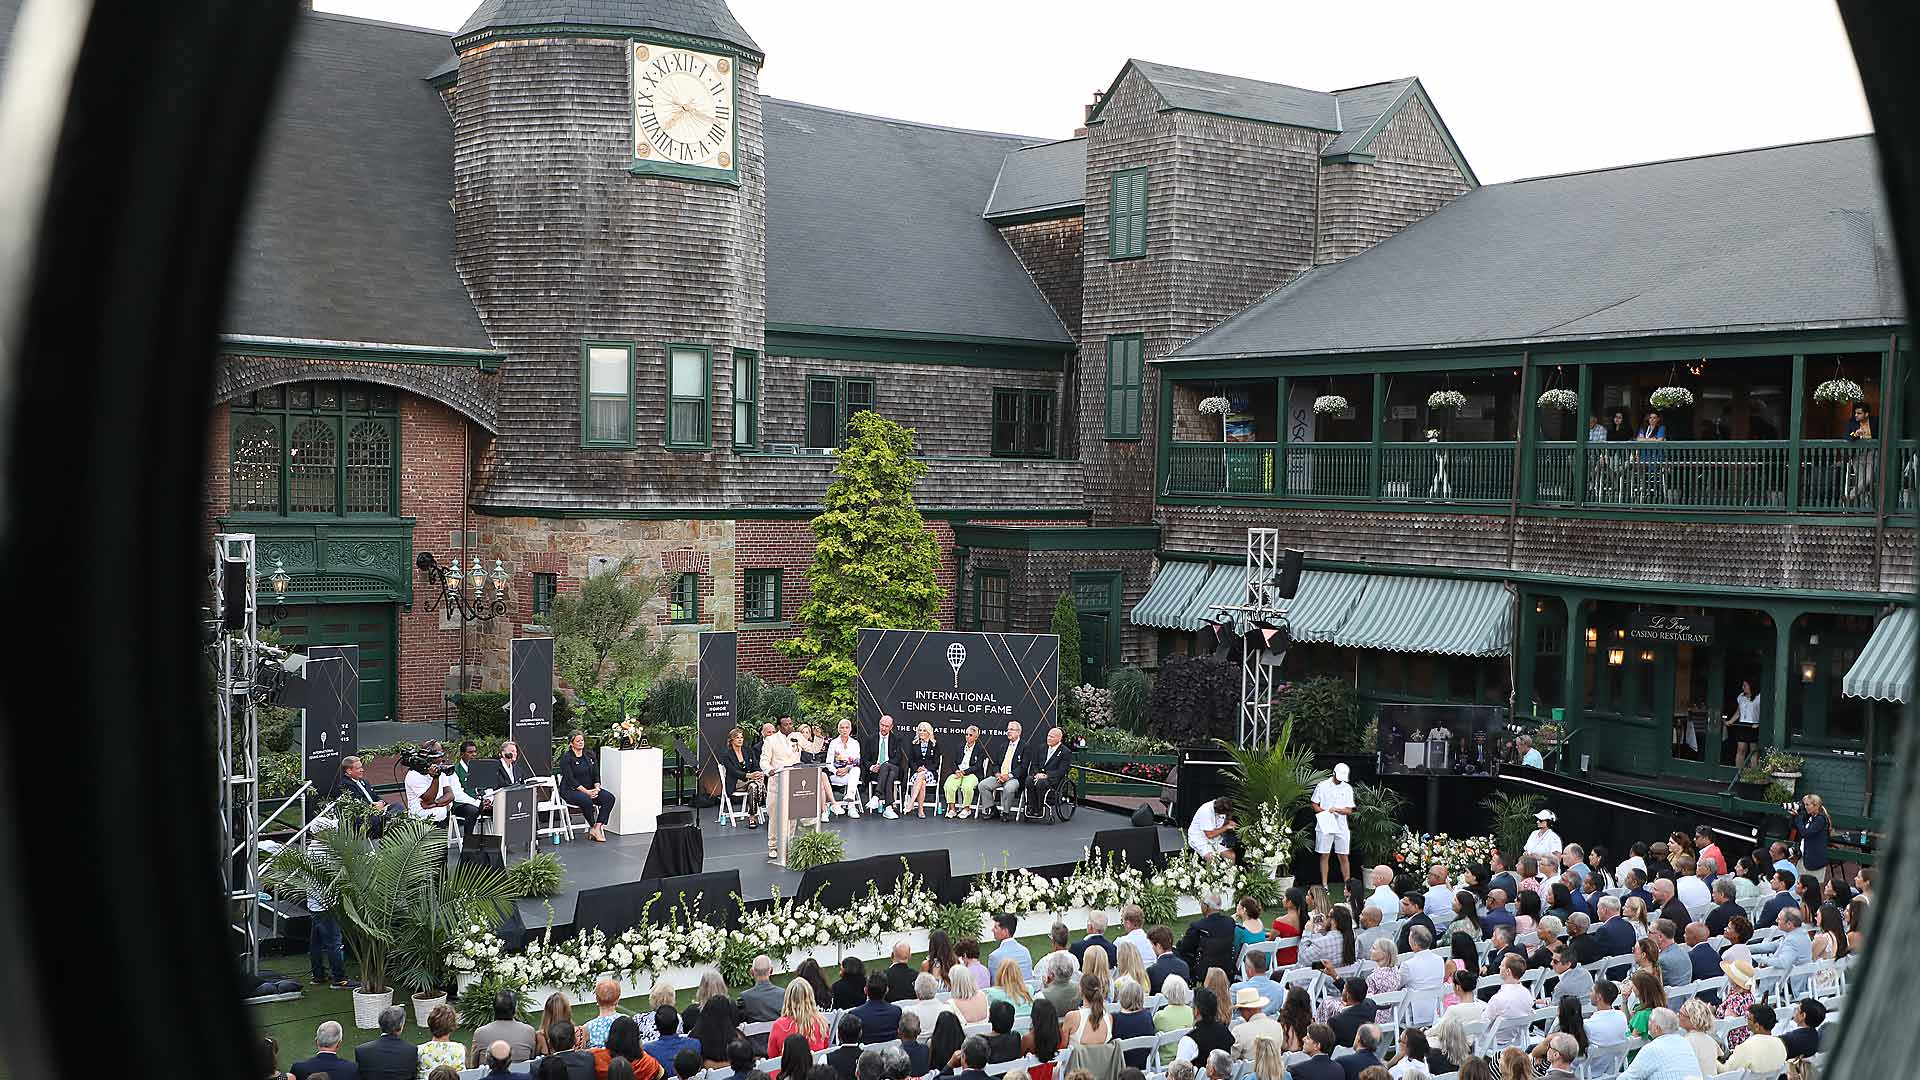 The International Tennis Hall of Fame ceremony.